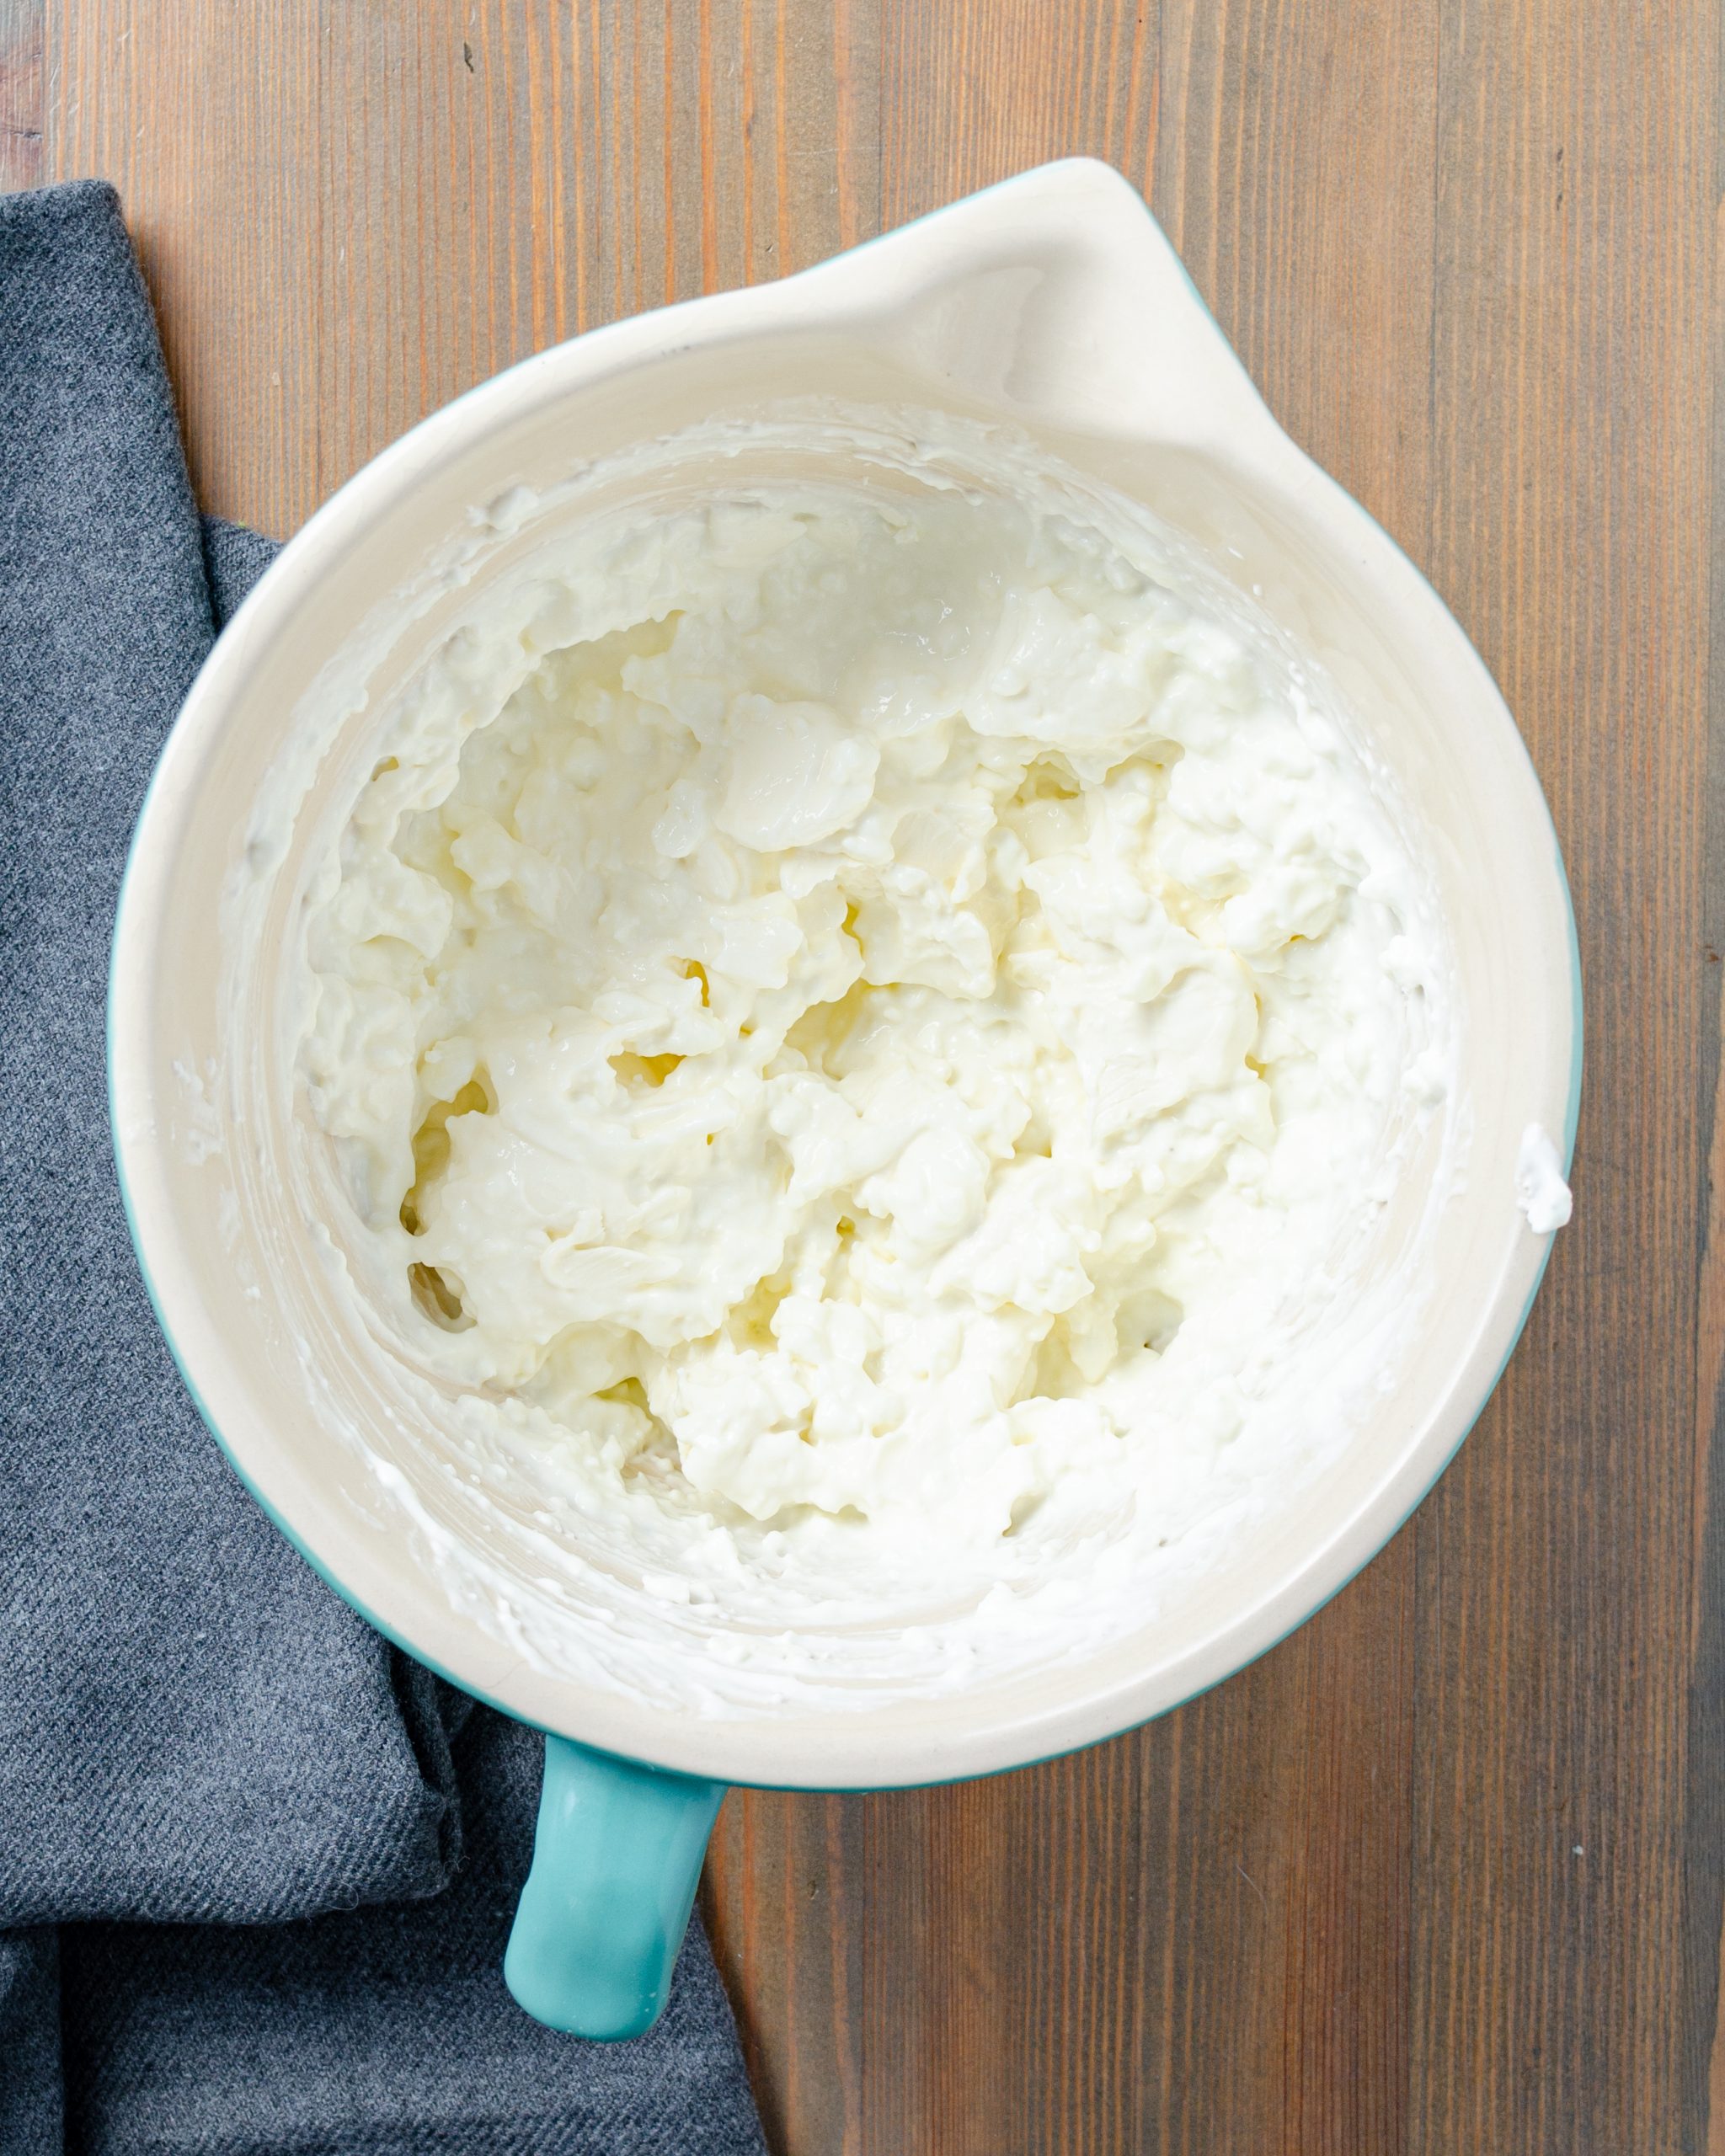 In a bowl, stir together the cream cheese, cottage cheese, and sour cream until well combined.